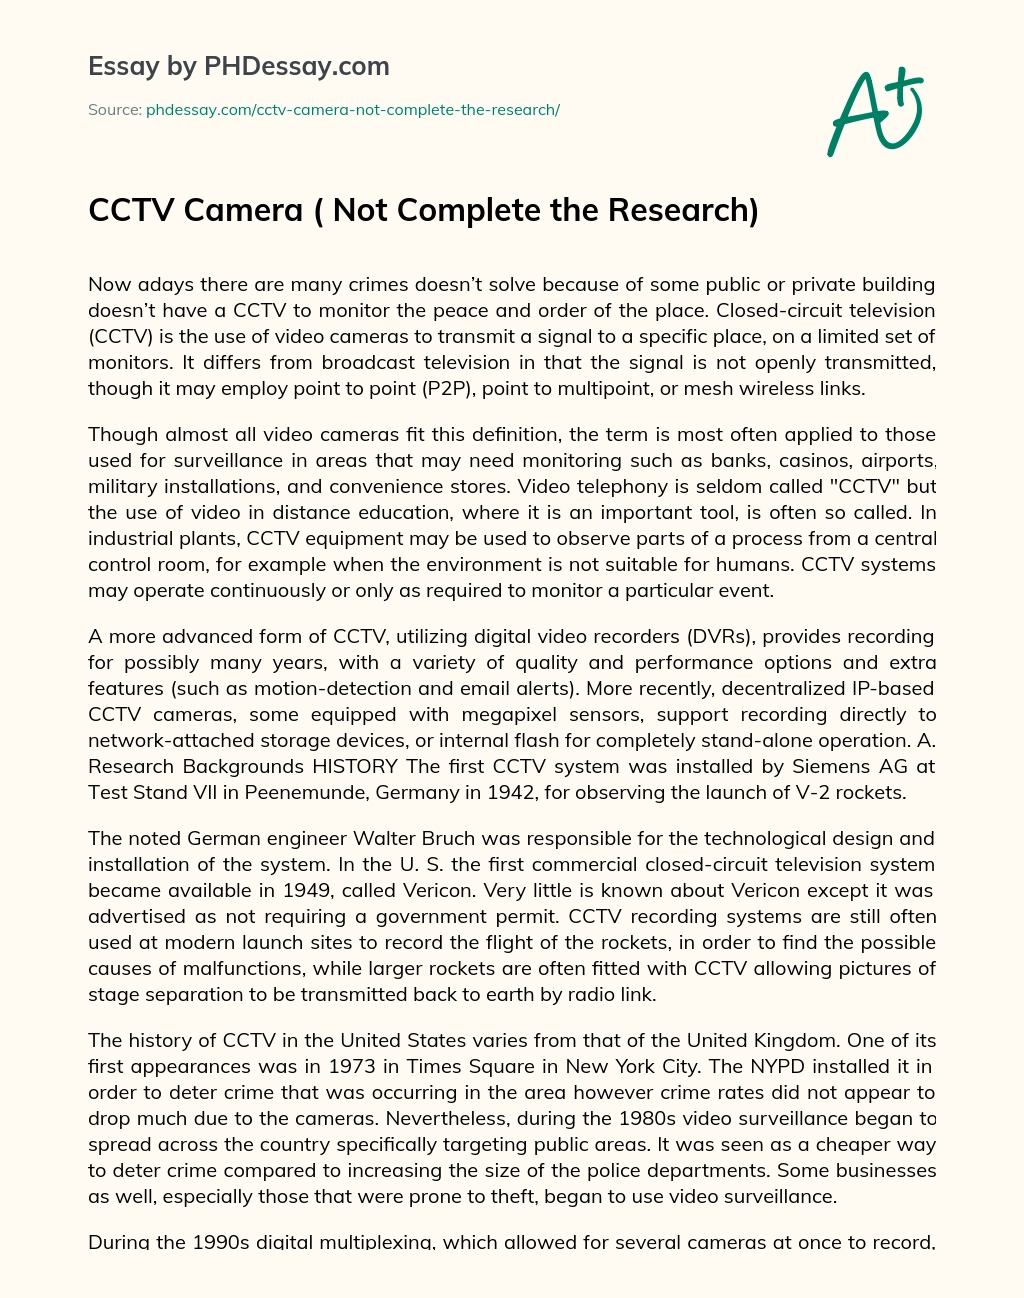 CCTV Camera ( Not Complete the Research) essay